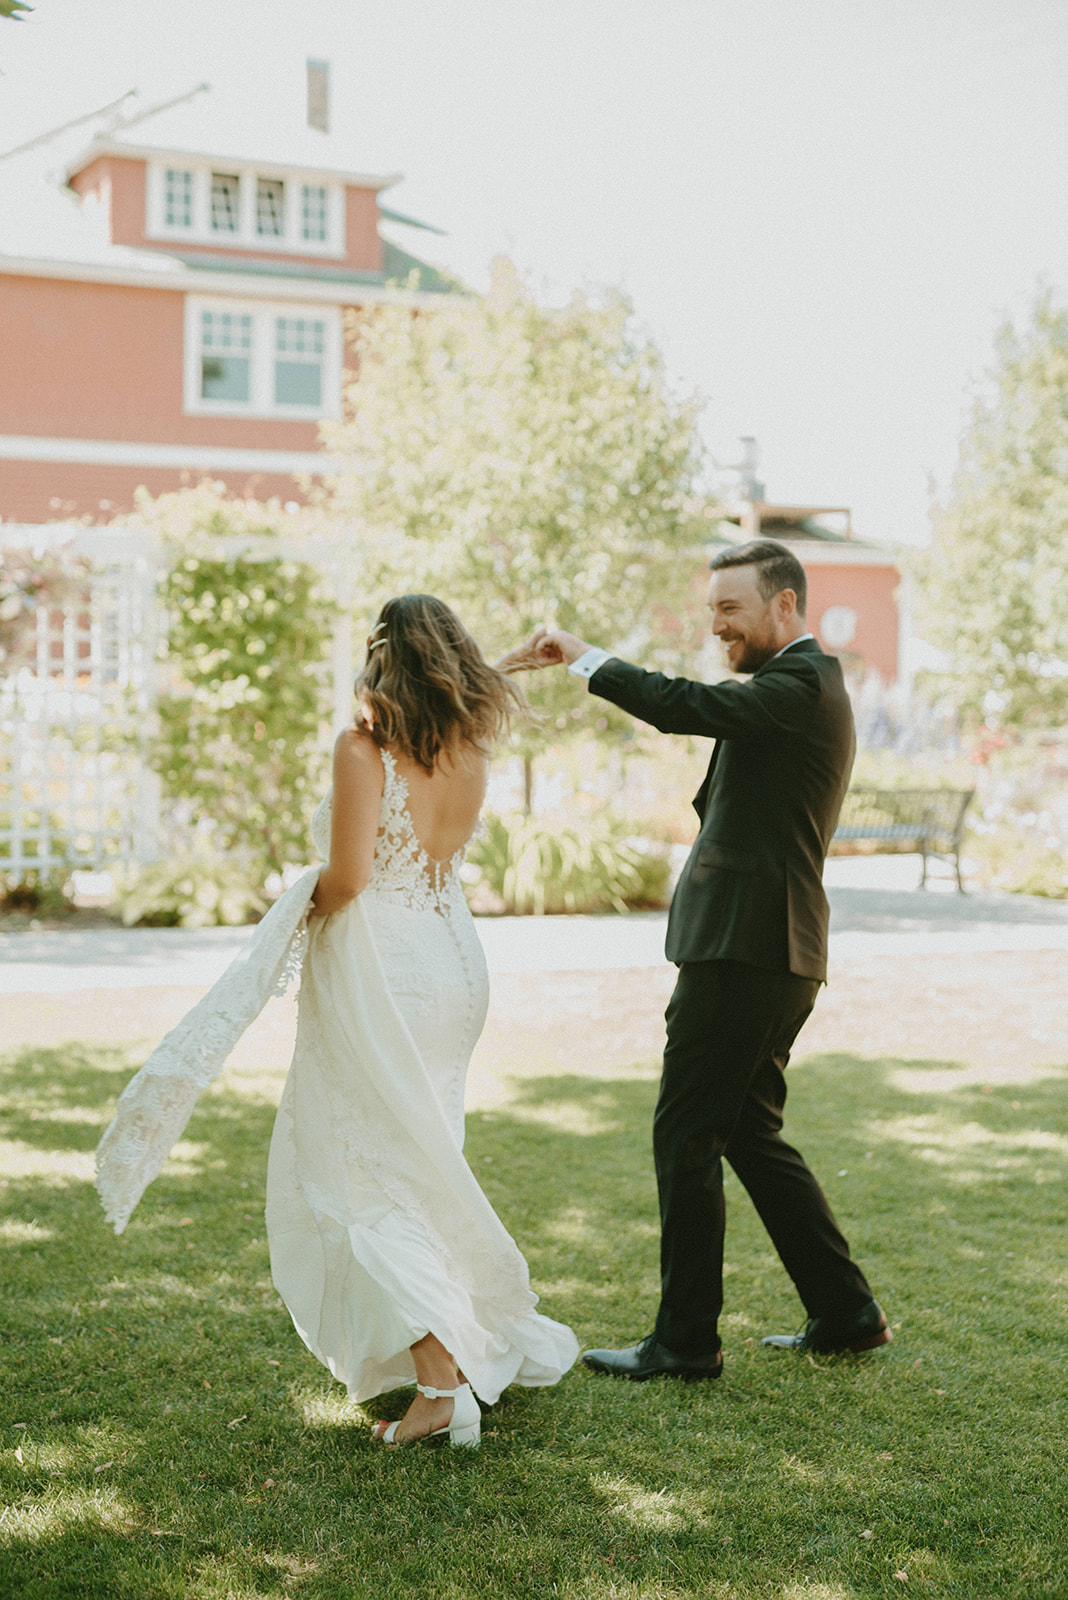 Summer wedding inspiration for this Deane House wedding ceremony